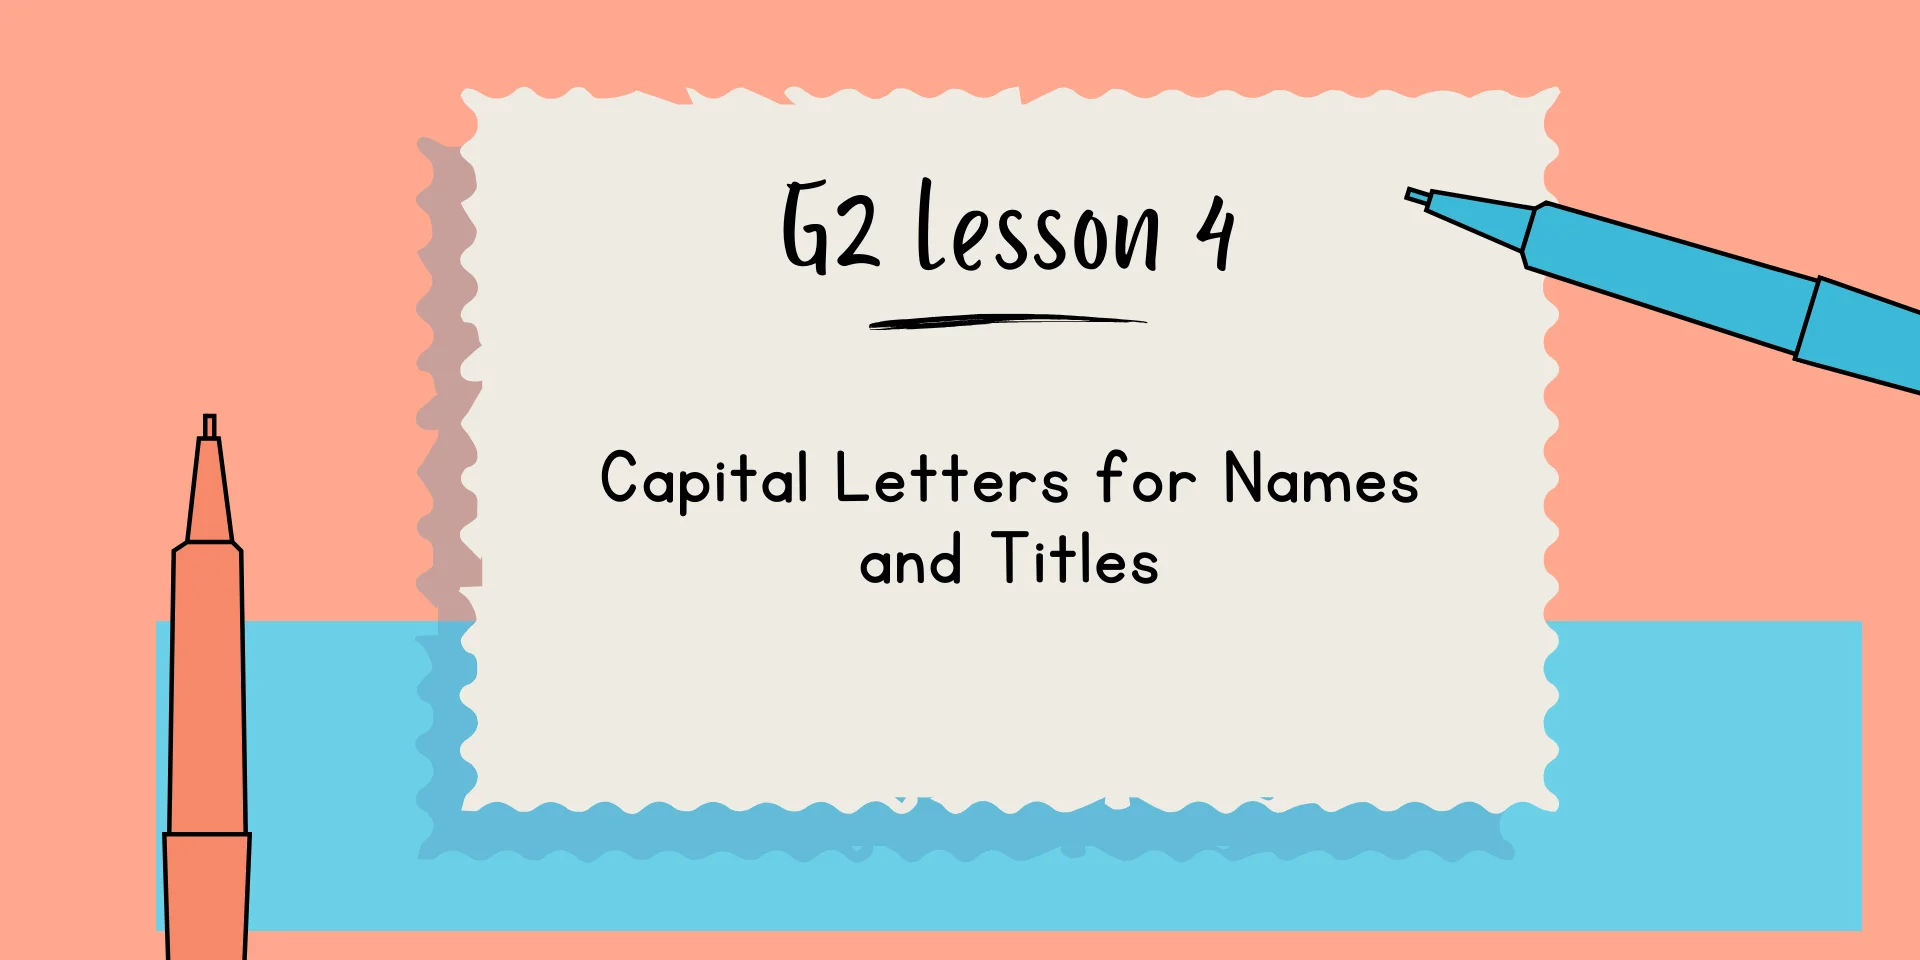 G2 Lesson 4 Capital Letters for Names and Titles